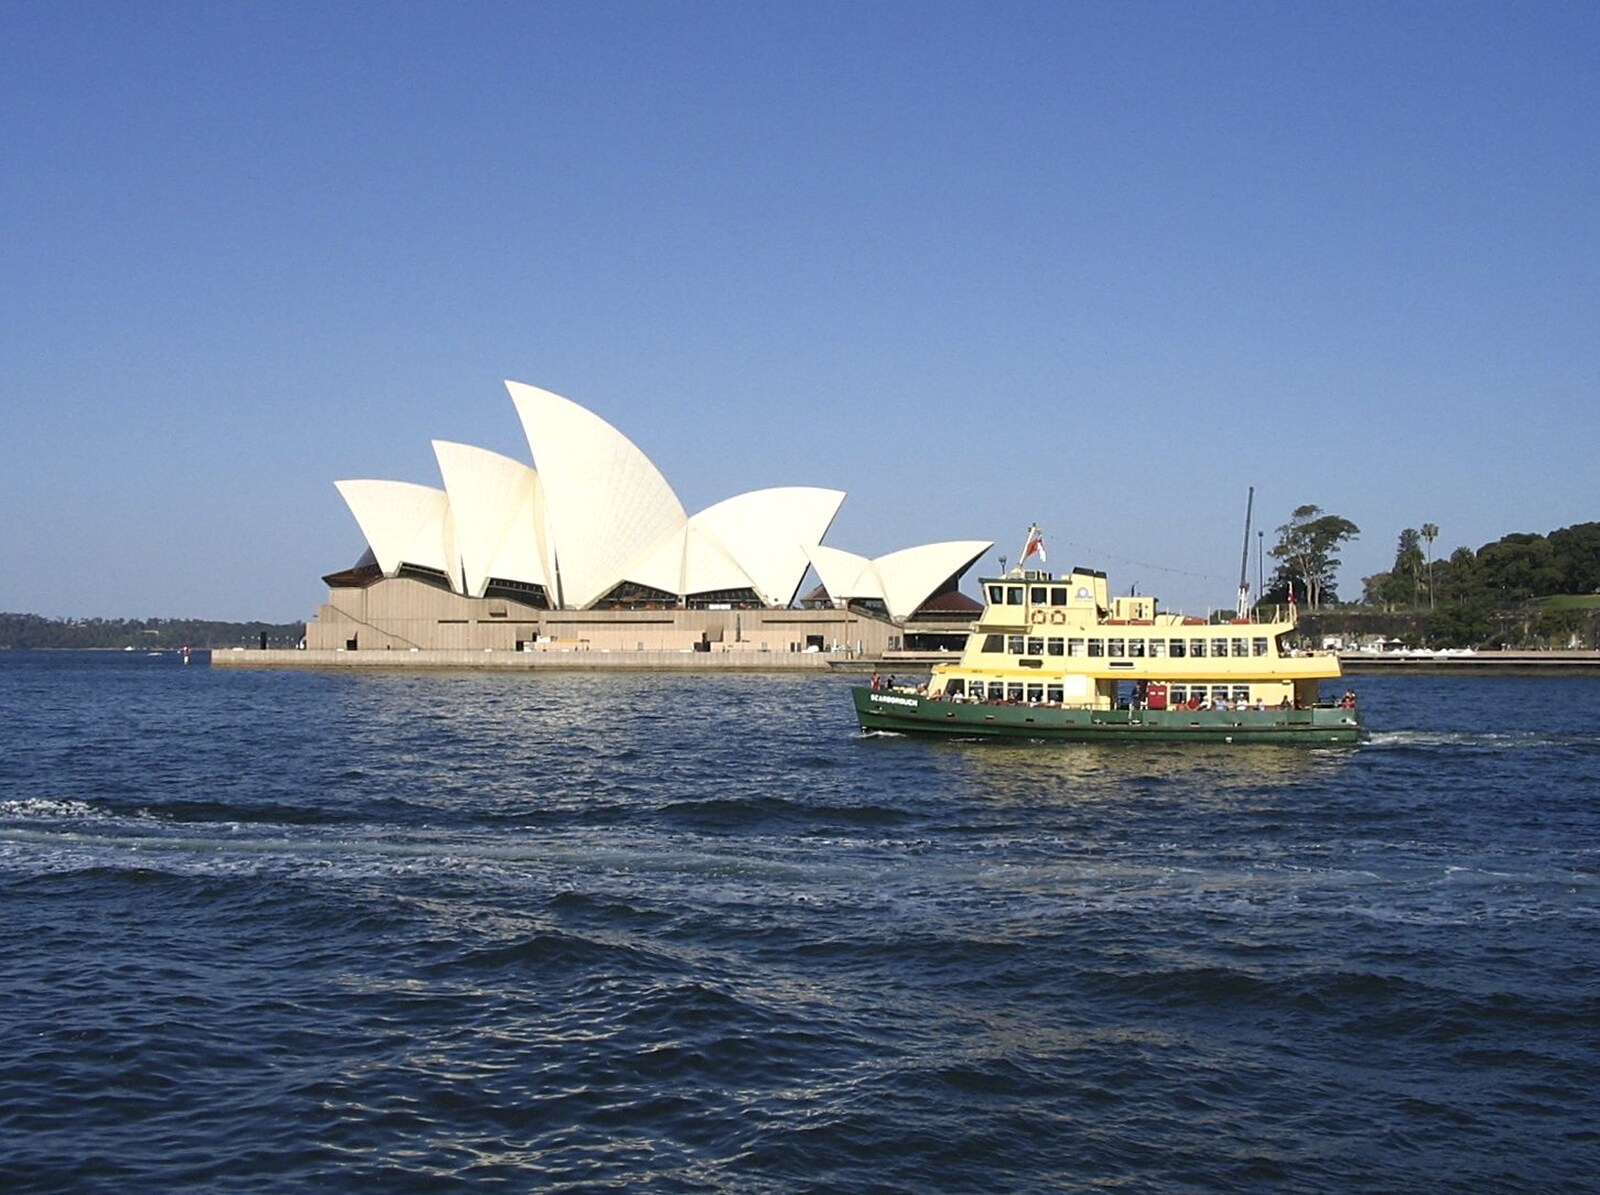 A ferry trundles past the Opera House from Sydney, New South Wales, Australia - 10th October 2004